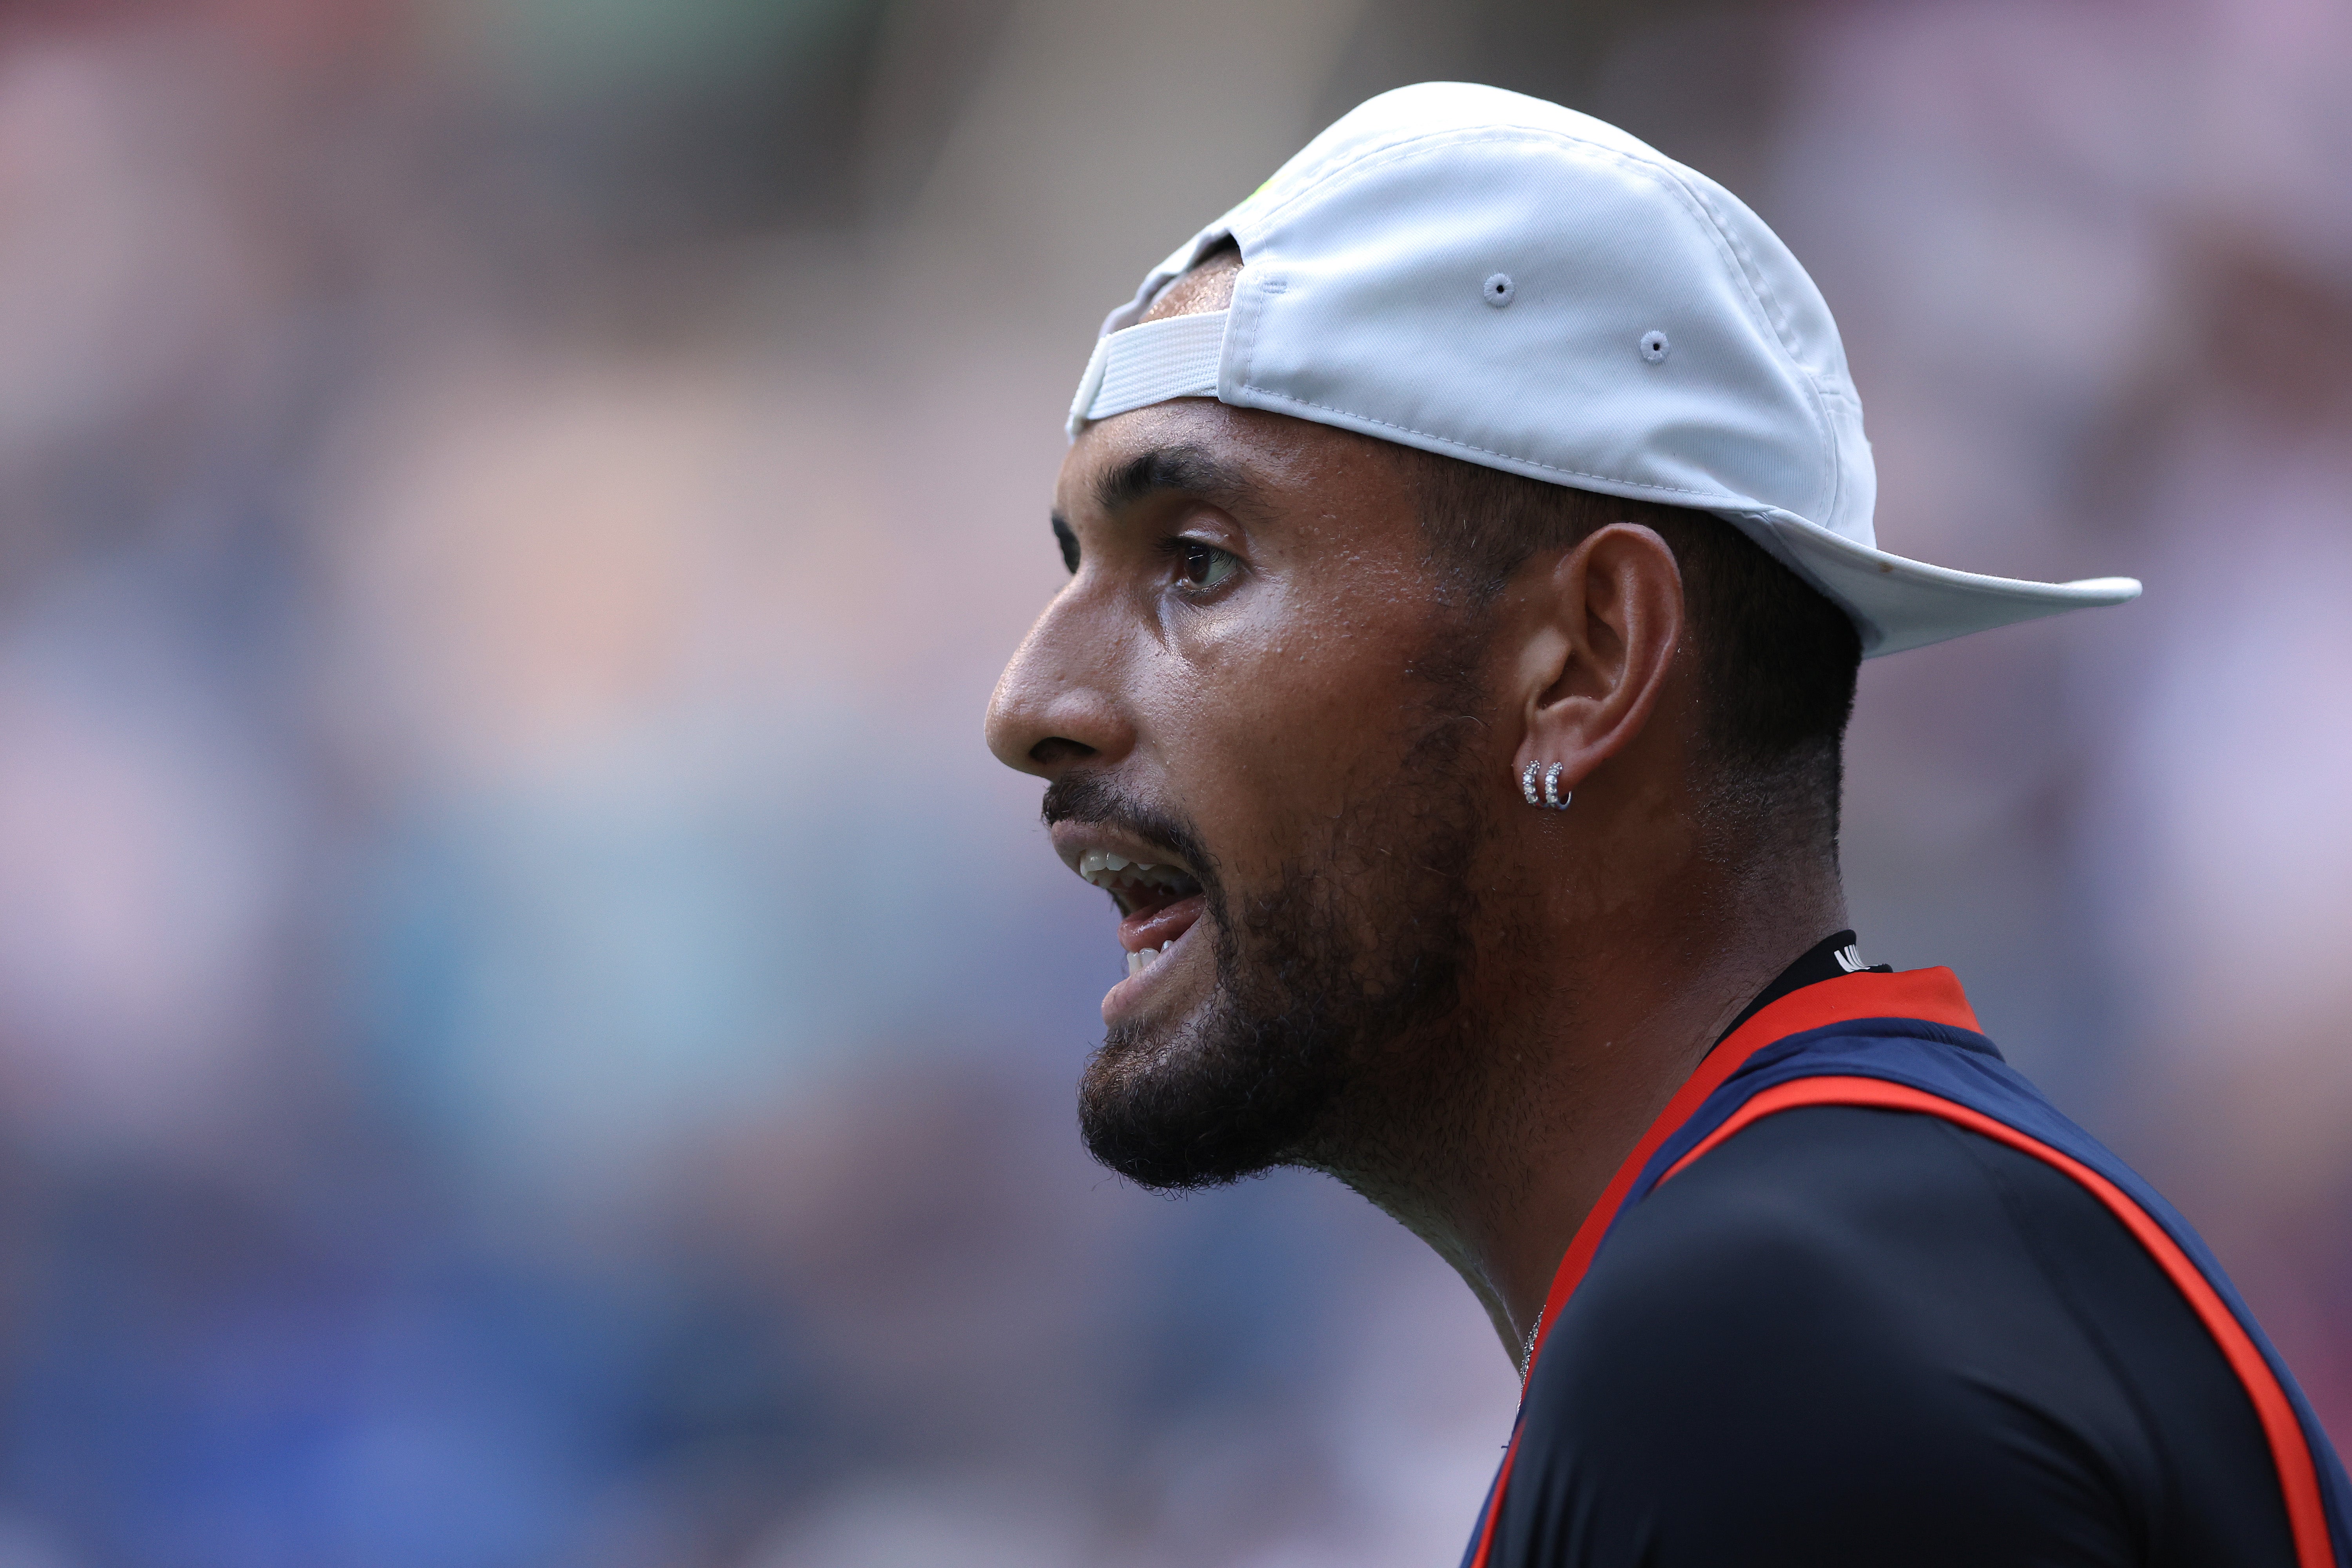 Nick Kyrgios in action during day three of the 2022 US Open